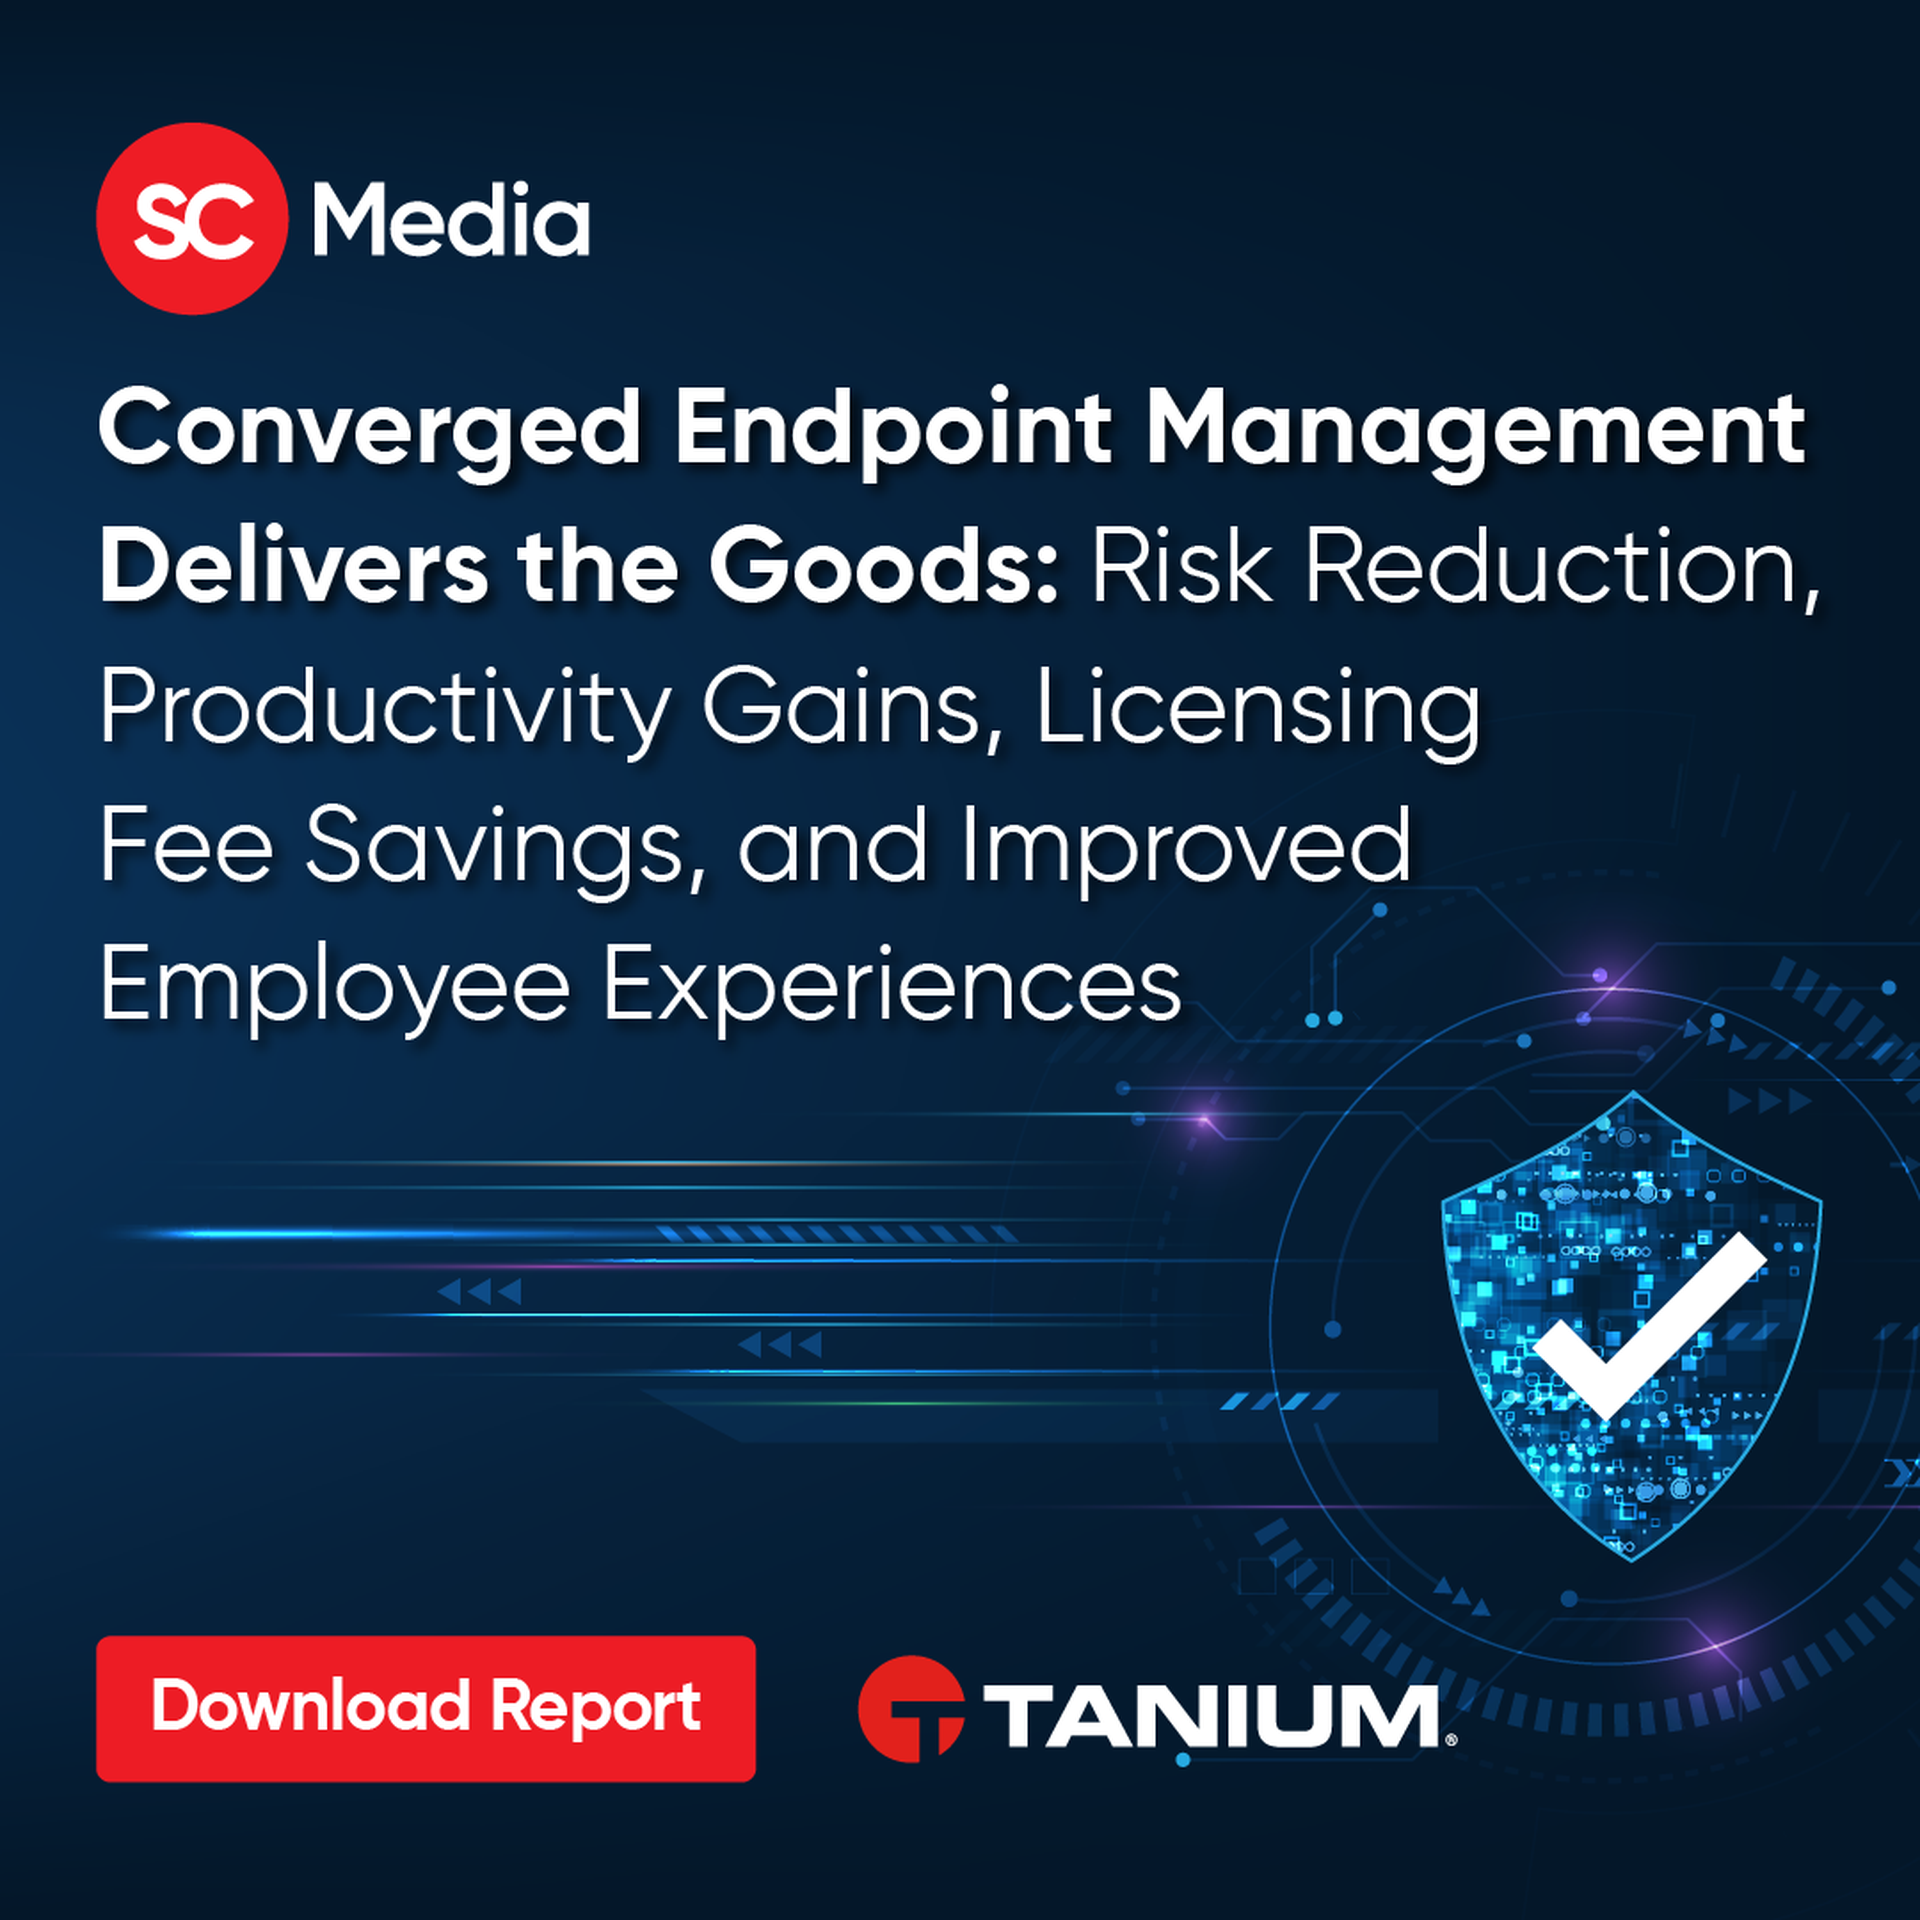 Converged Endpoint Management Delivers the Goods: Risk Reduction, Productivity Gains, Licensing Fee Savings, and Improved Employee Experiences